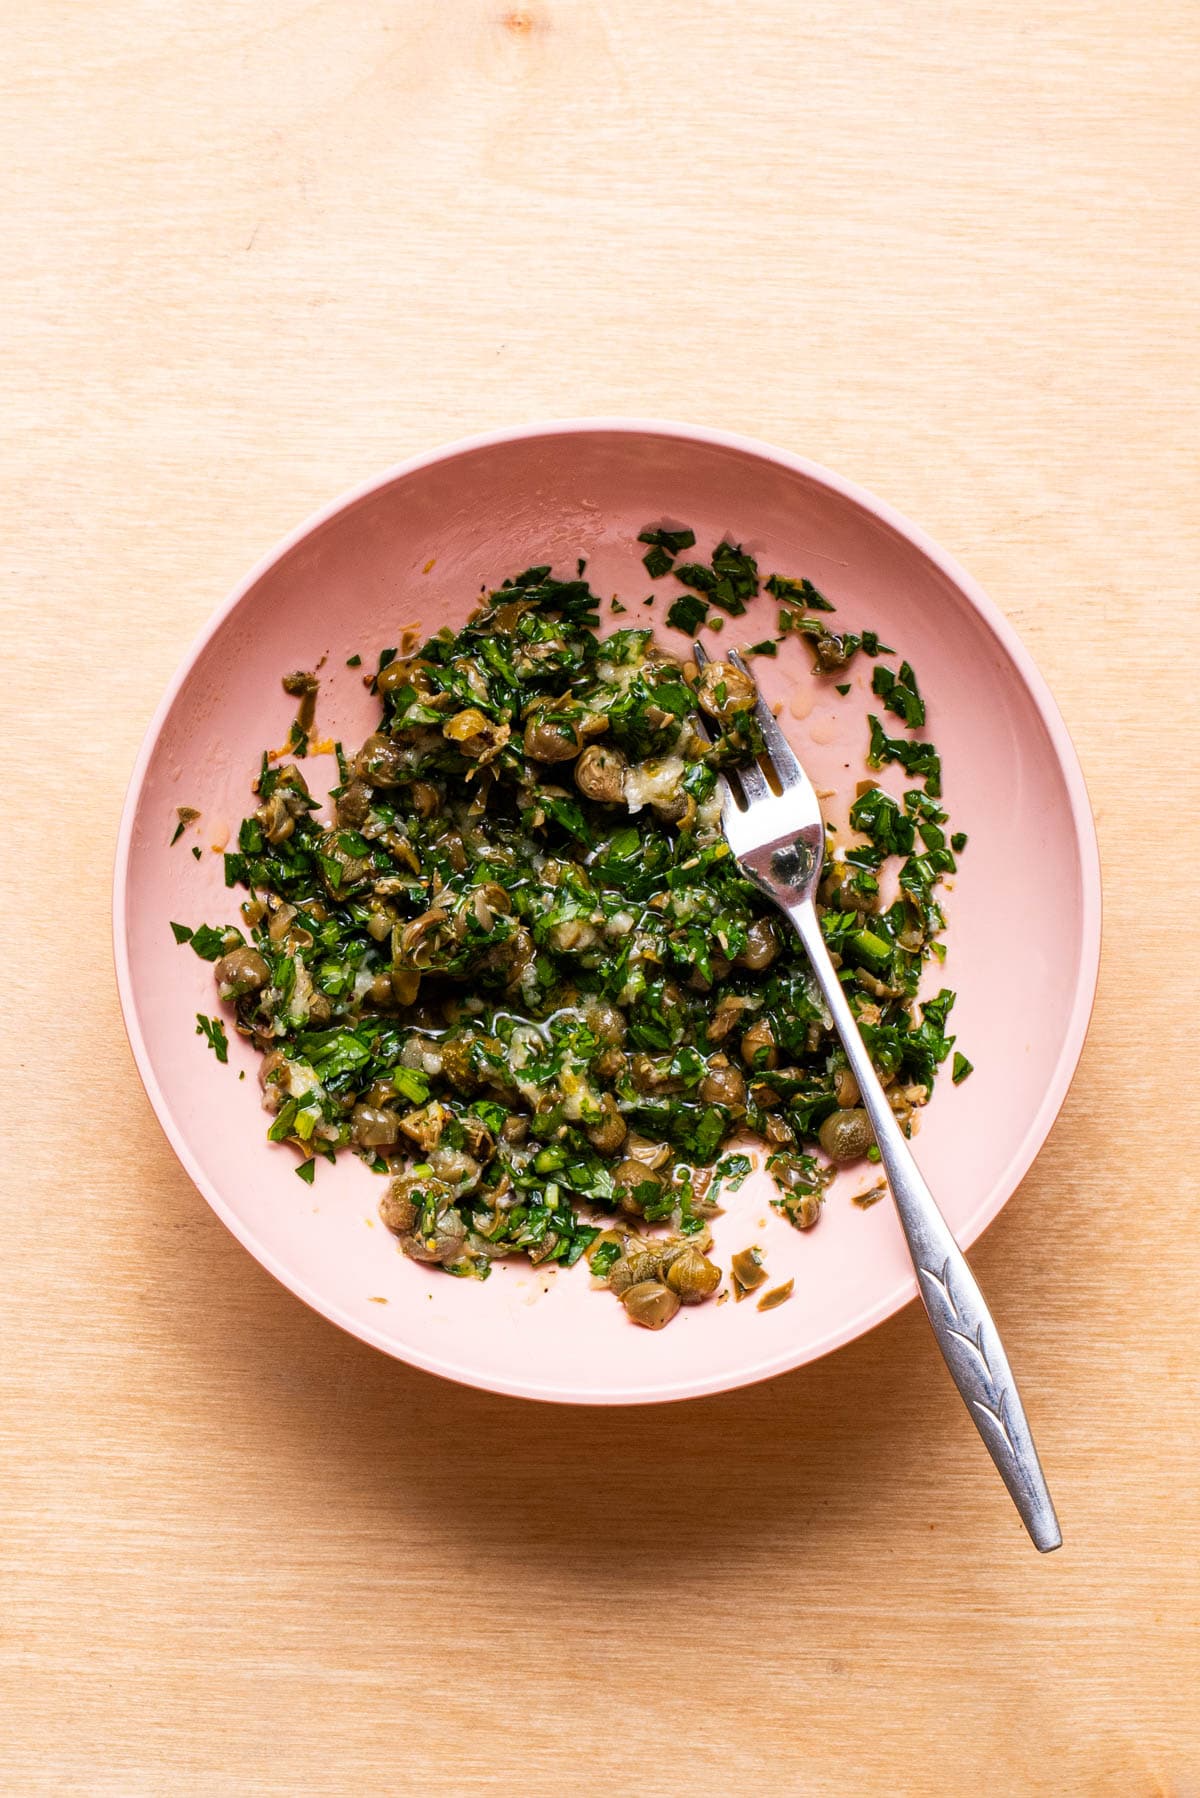 Caper-parsley relish in a pink bowl.